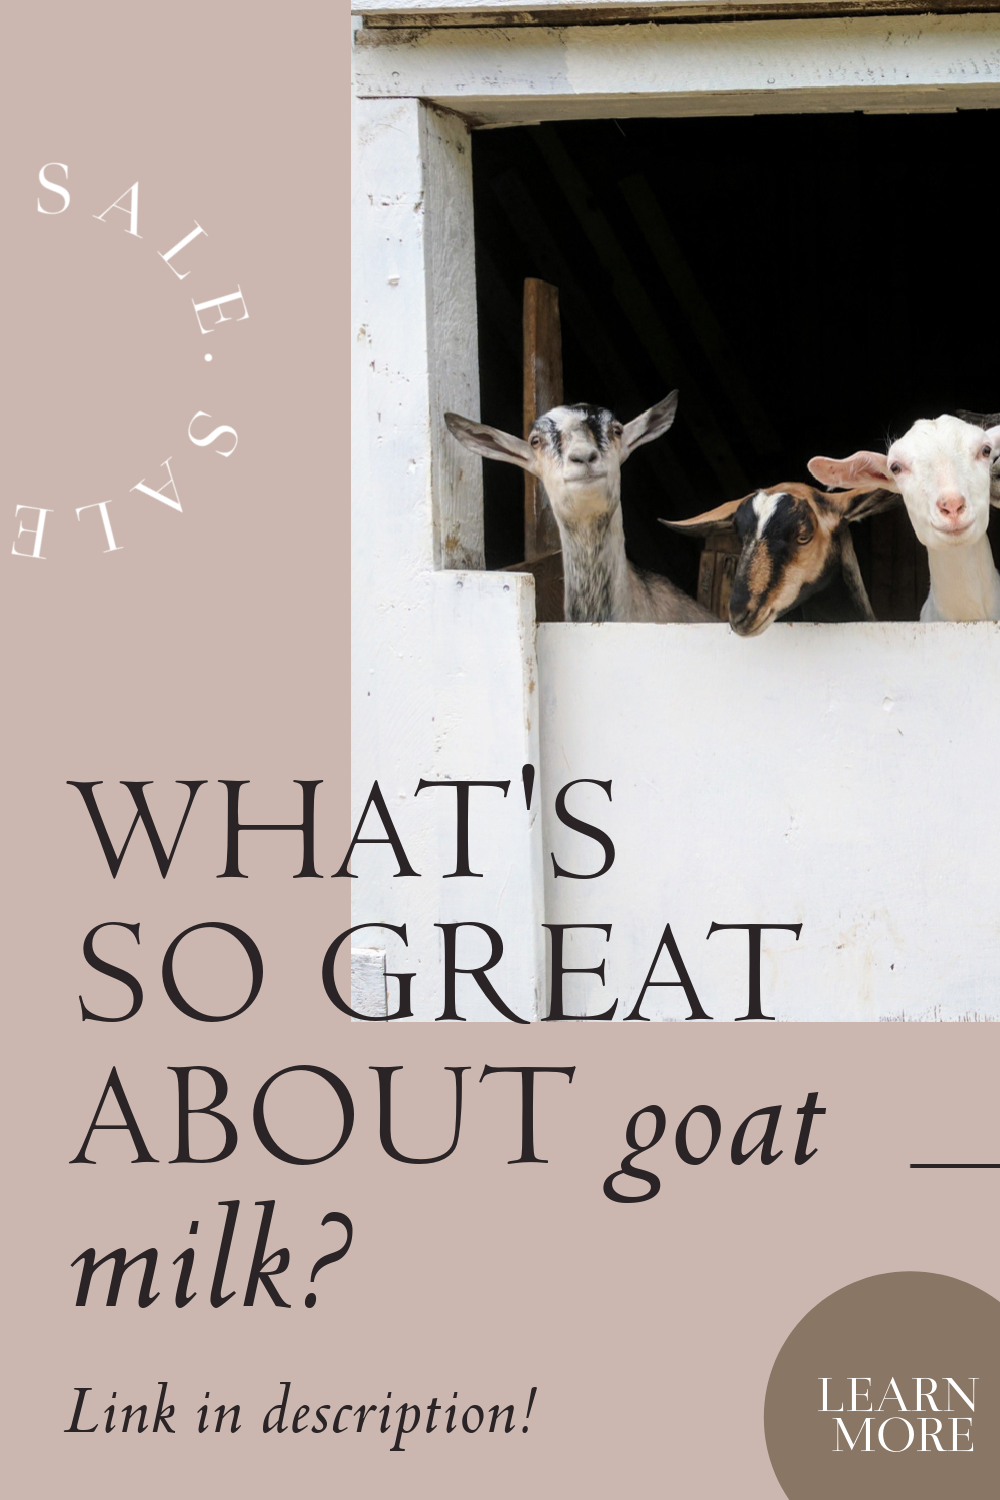 What's so Great About Goat Milk?